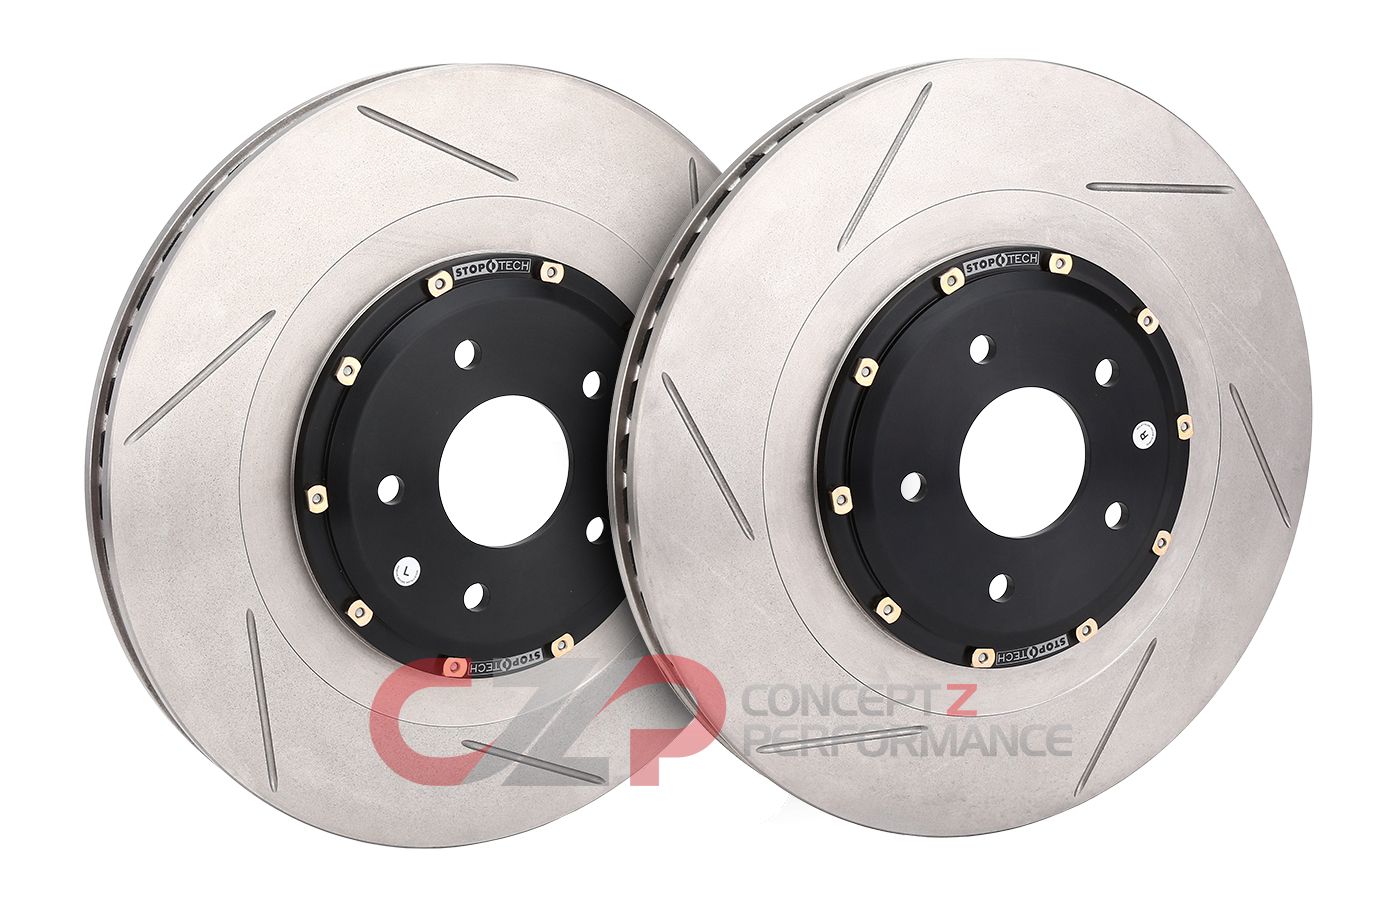 Stoptech 2pc 2 Piece Aero Rotor Direct Replacement, Sport Akebono Calipers, Front Slotted - Nissan 370Z / Infiniti G37 Q50 Q60 Q70 M37 M56 FX50